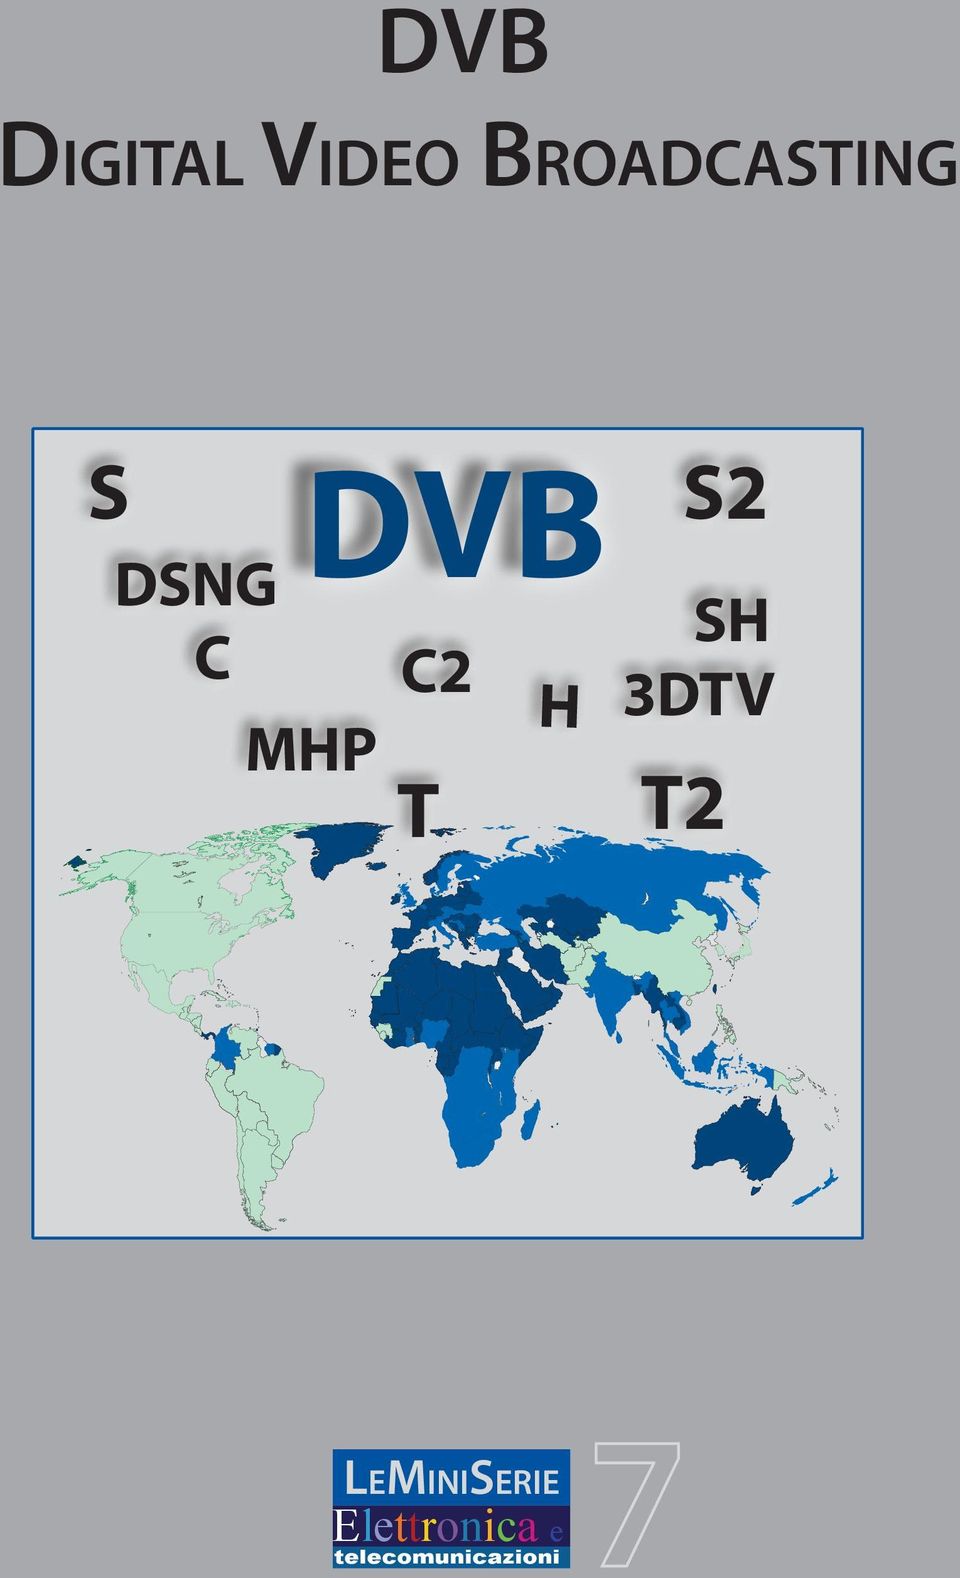 Blue indicates countries that have adopted or deployed DVB-T and DVB-T2.